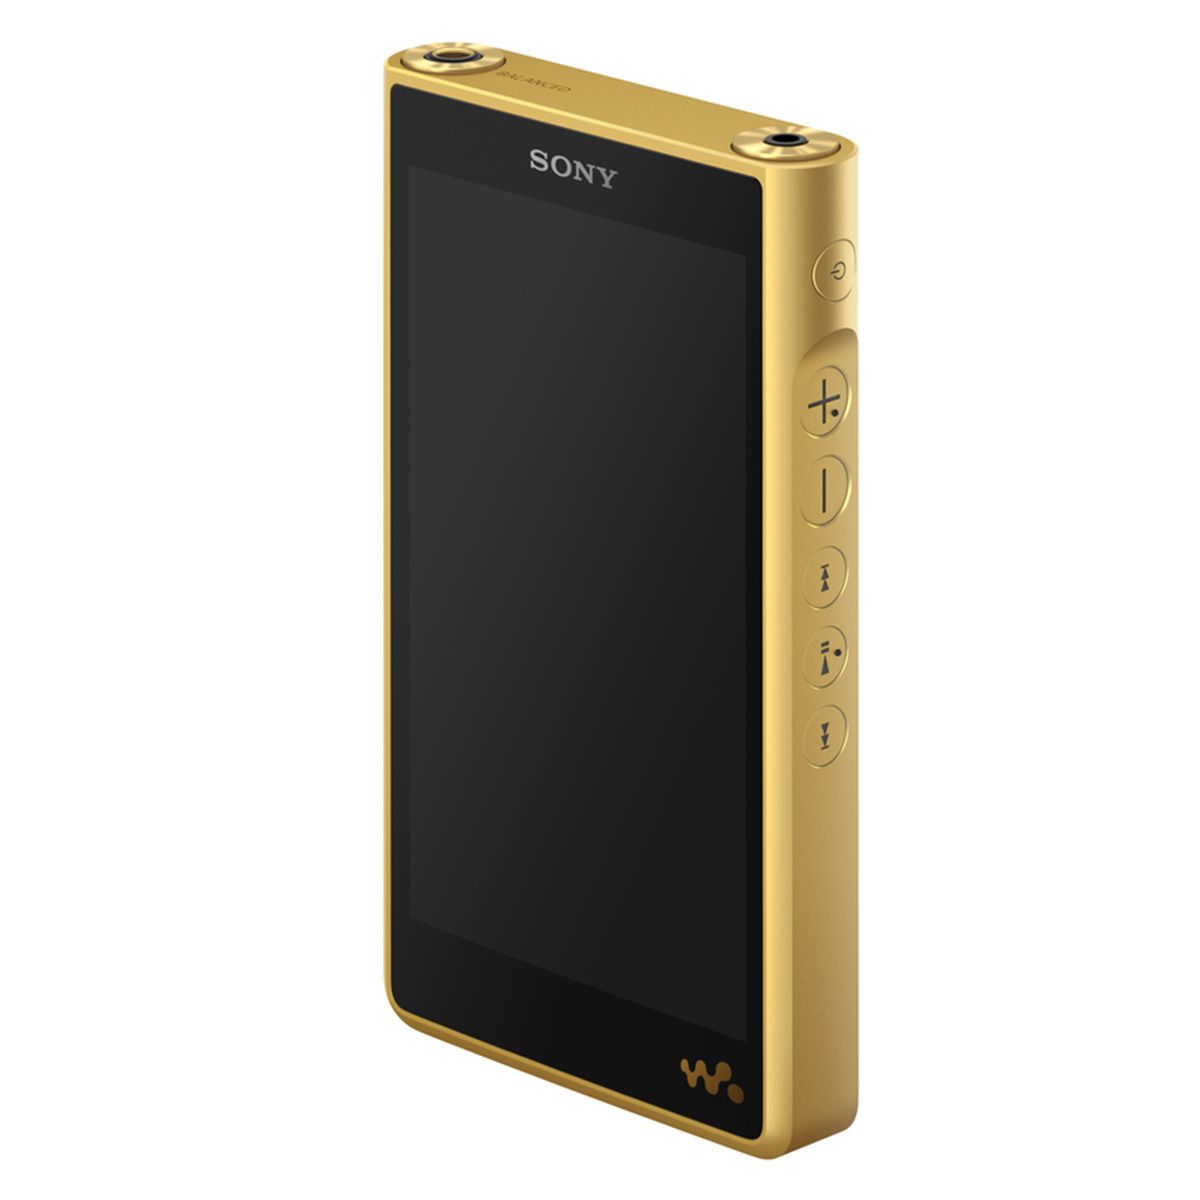 Sony Walkman WM1ZM2 - Signature Series Digital Player - Android 11 - angled front view with blank screen